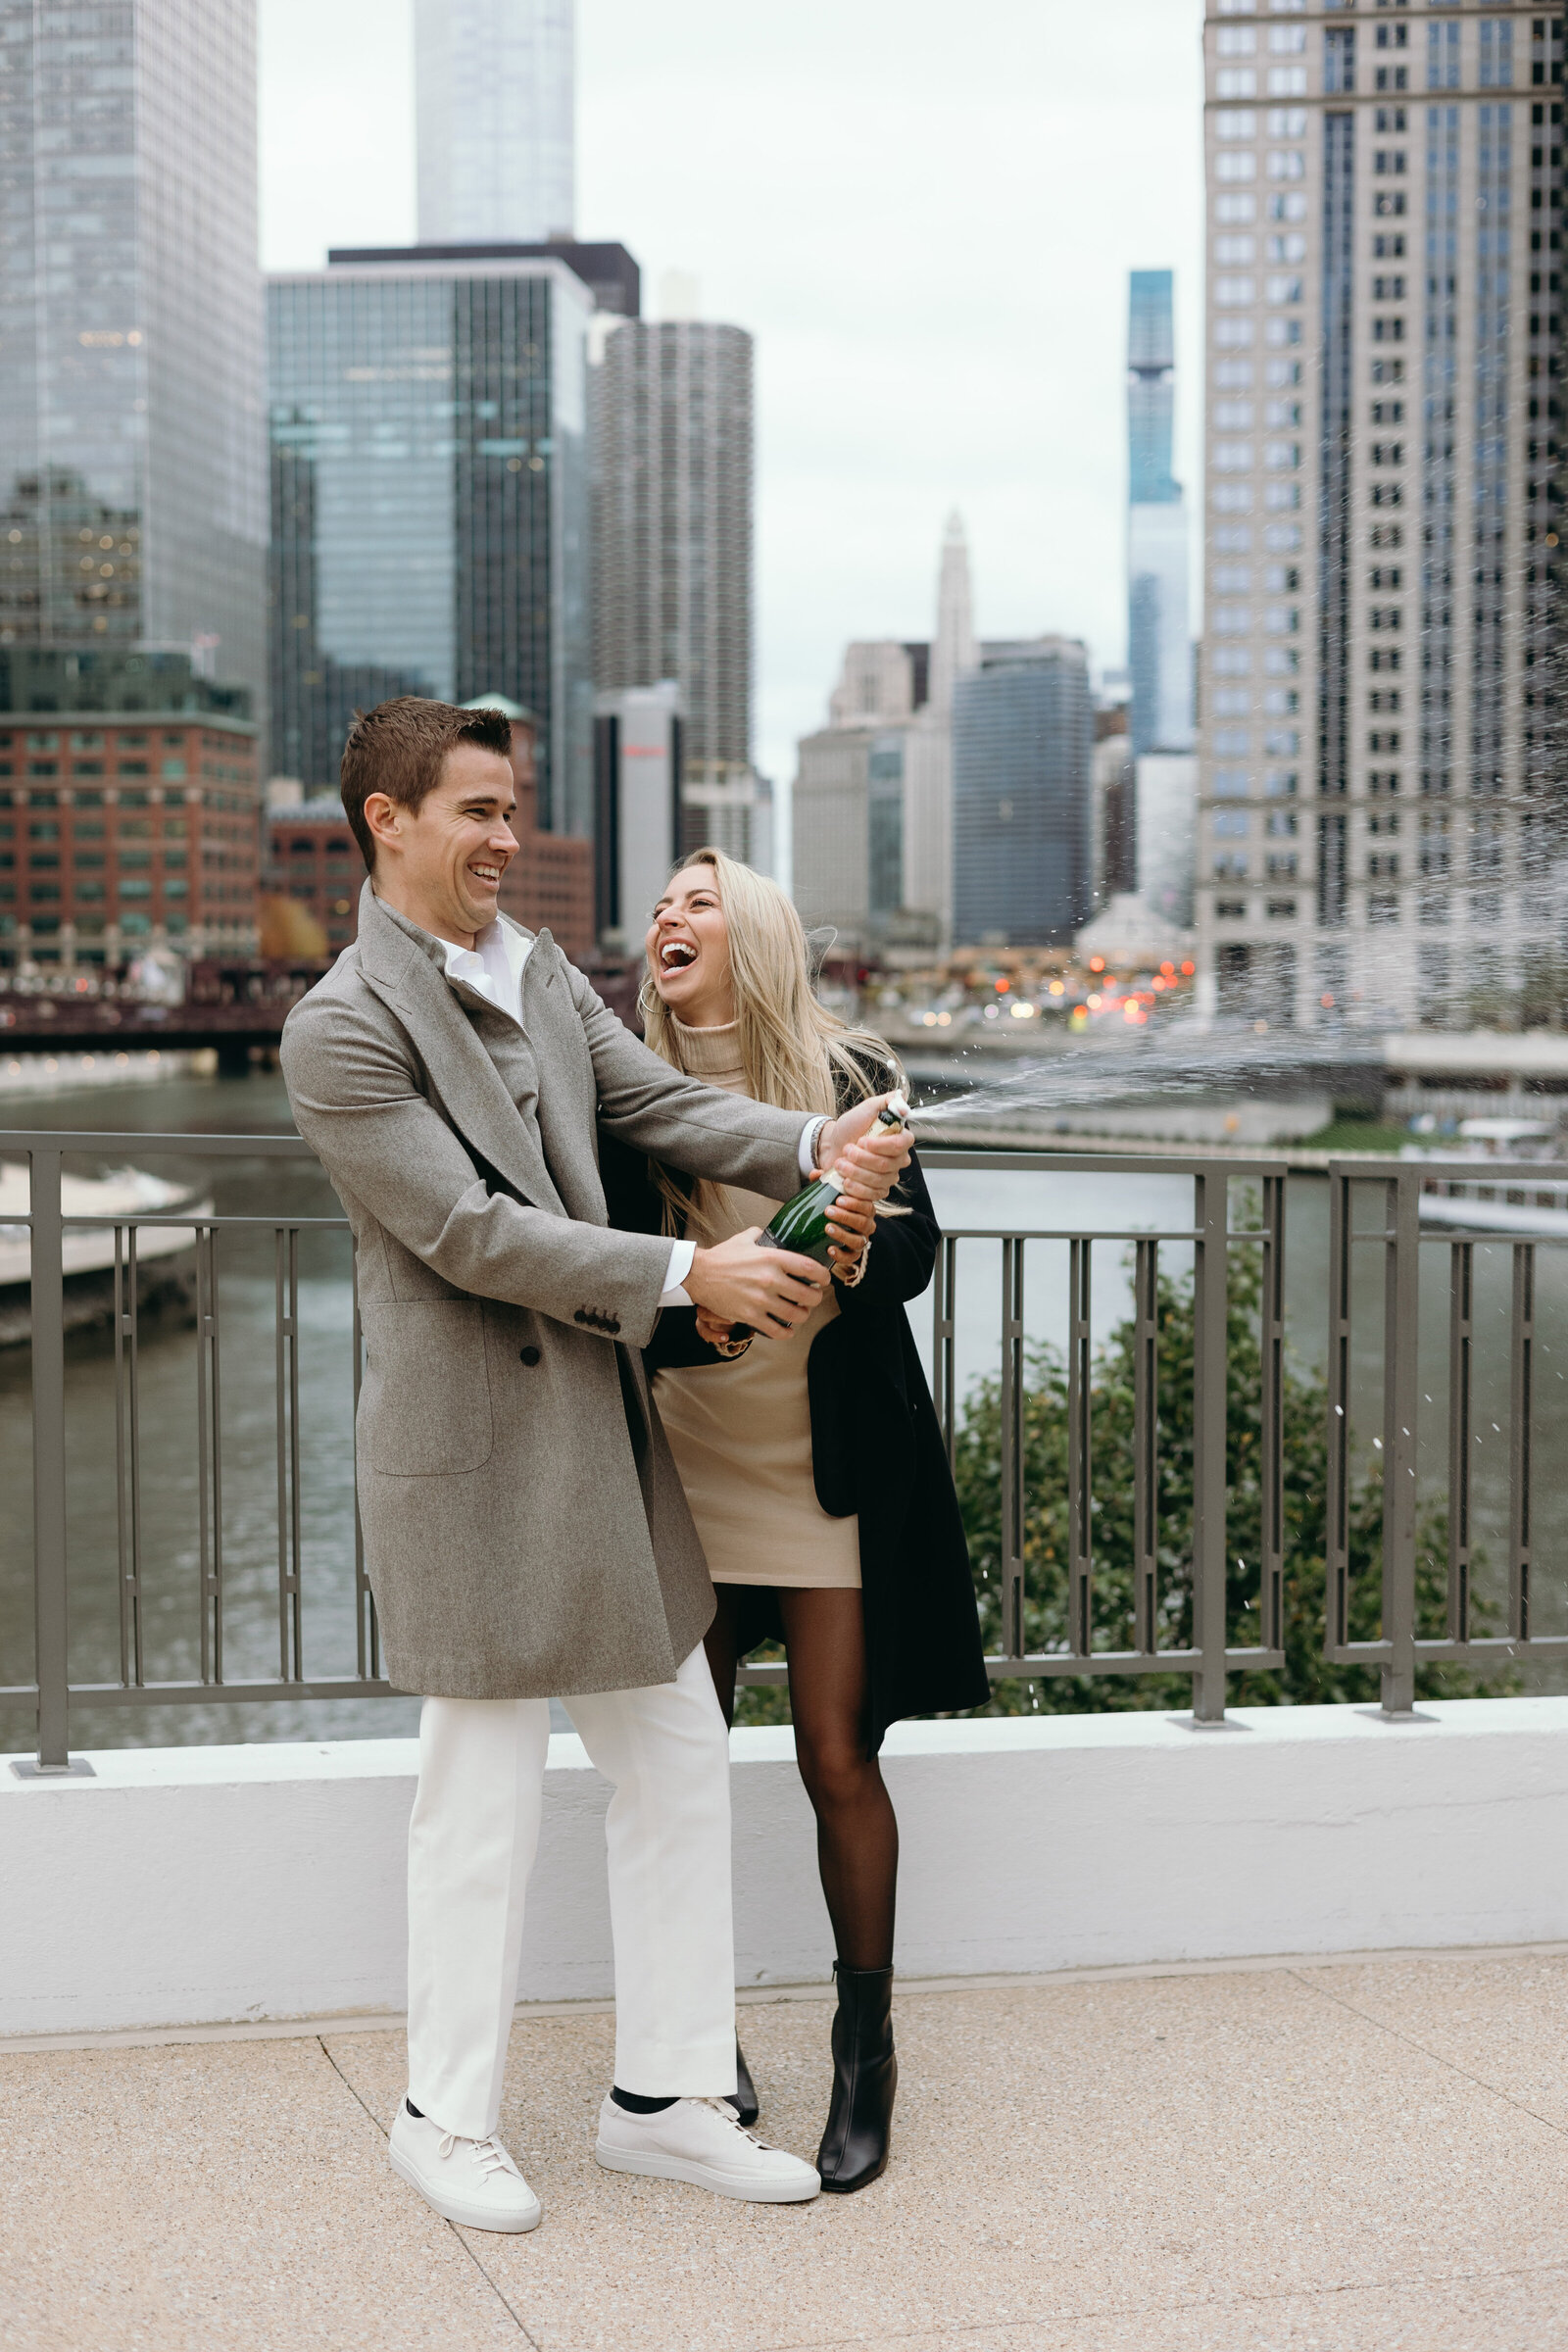 Z Photo and Film - Cody and Silvana's Chicago Engagement Shoot - Chicago, Illinois-128